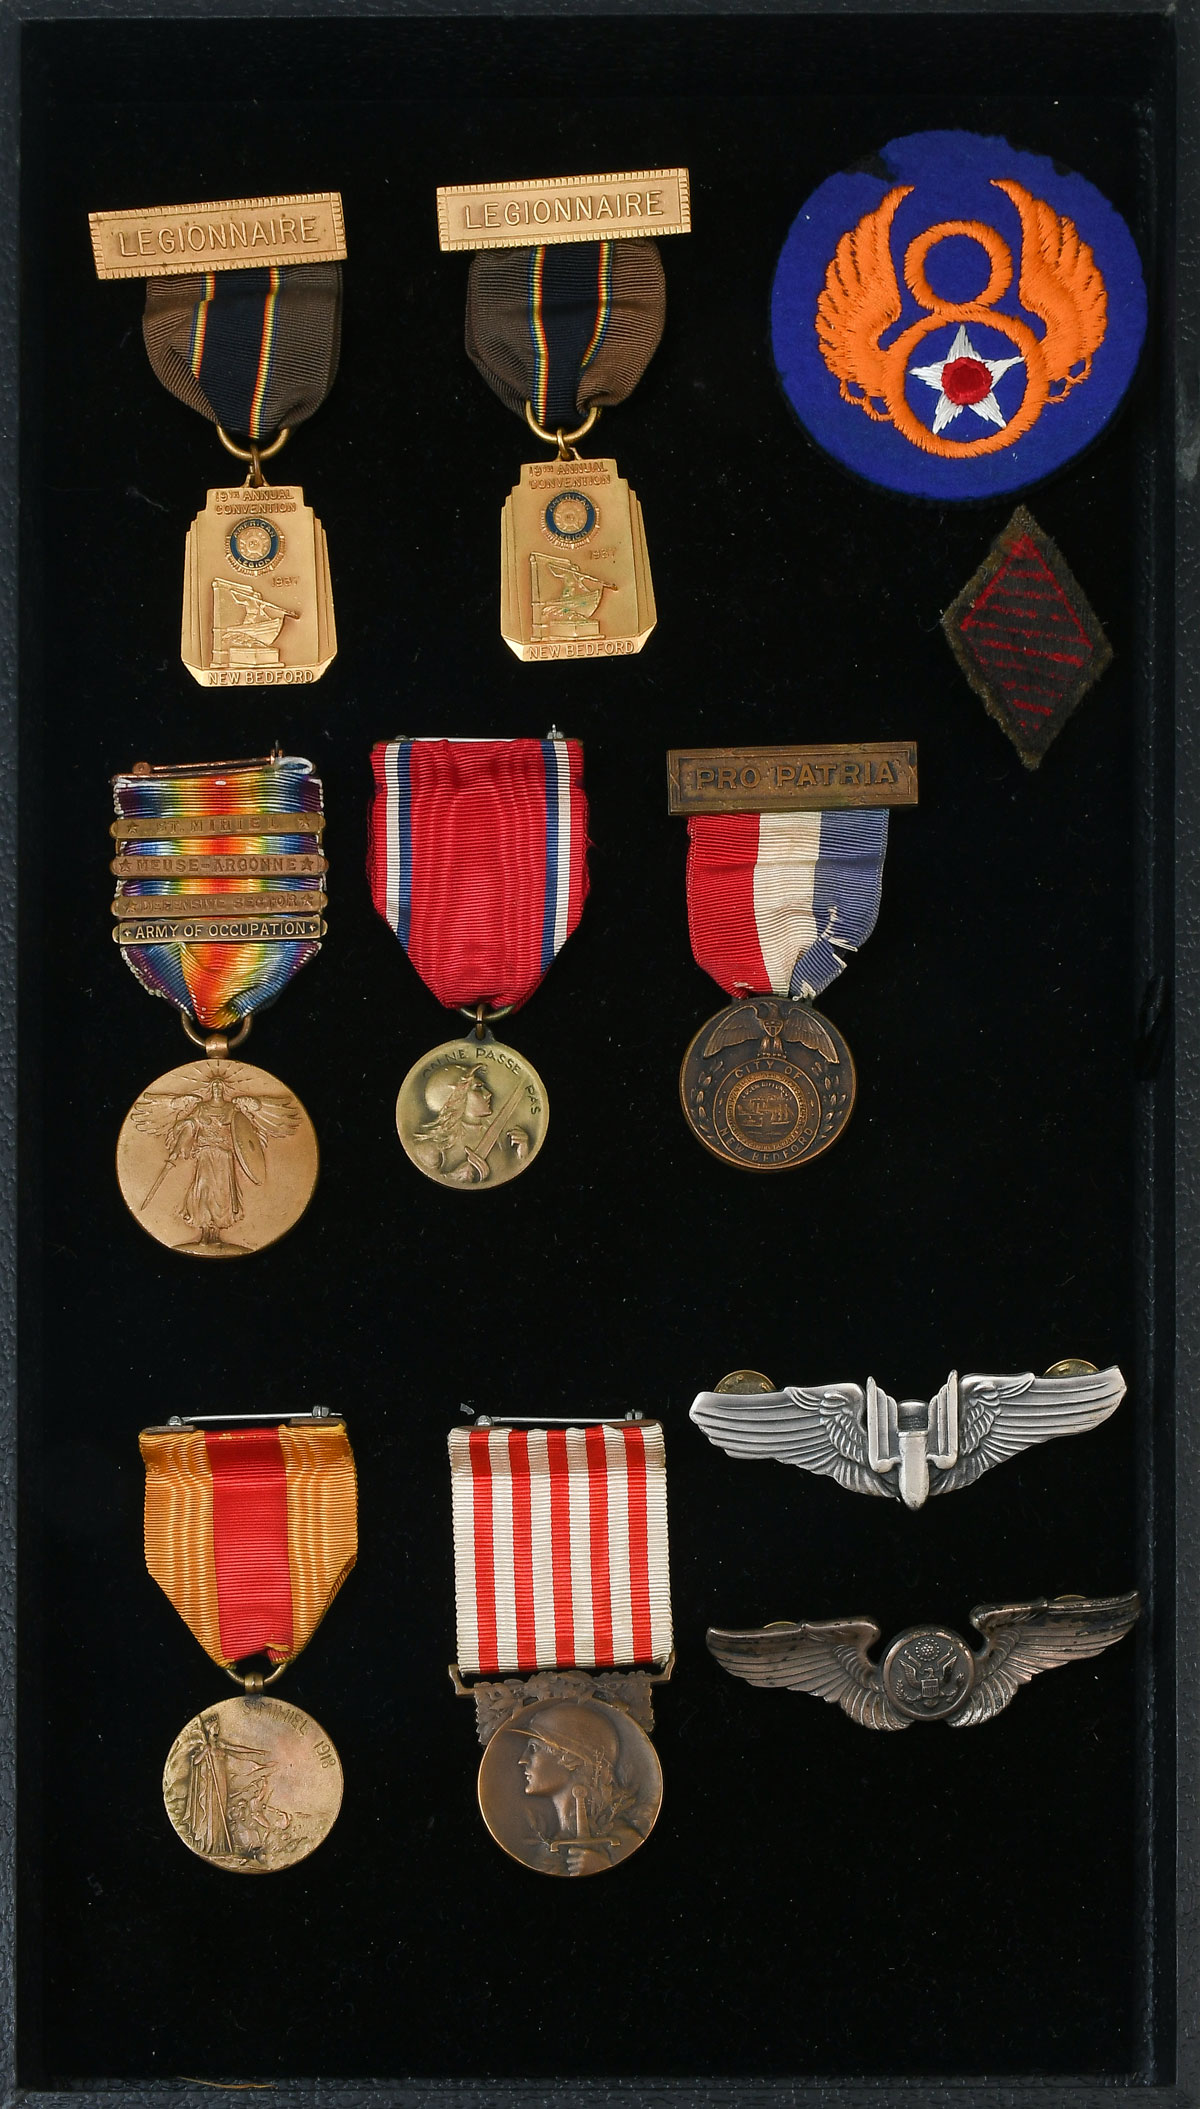 11 PC. MILITARY MEDAL & BADGE COLLECTION: